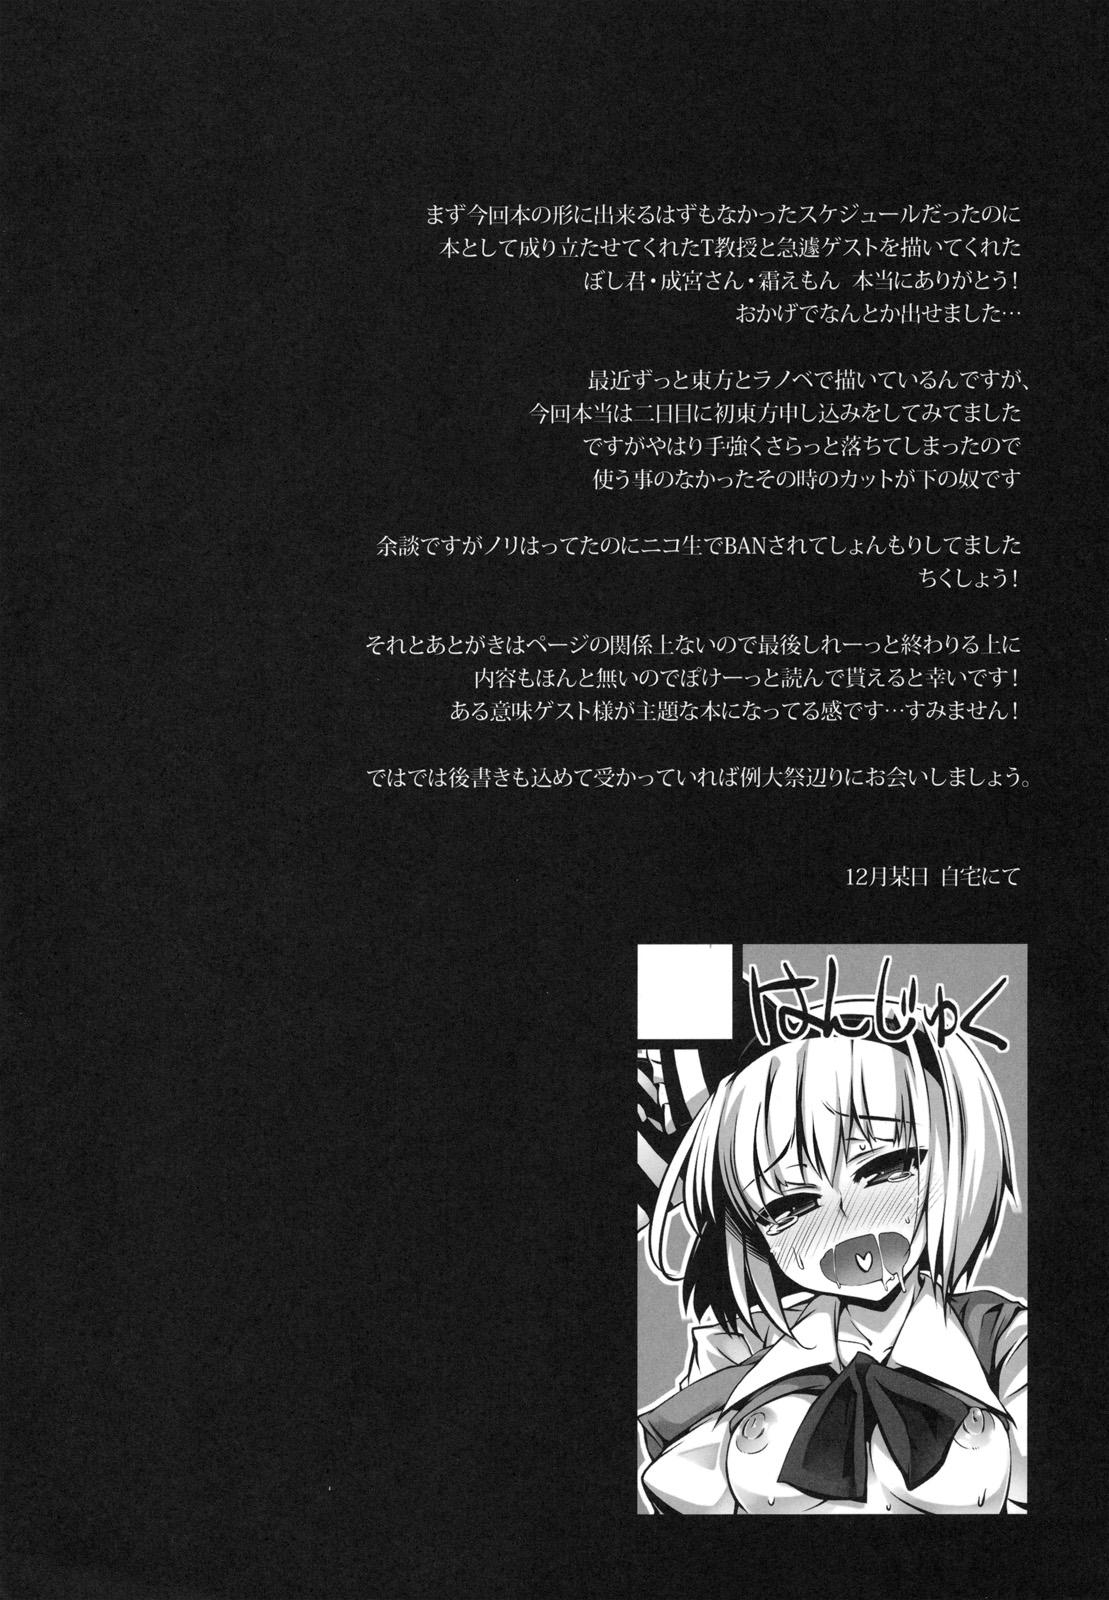 Perfect SaNaX - Touhou project Tan - Page 3